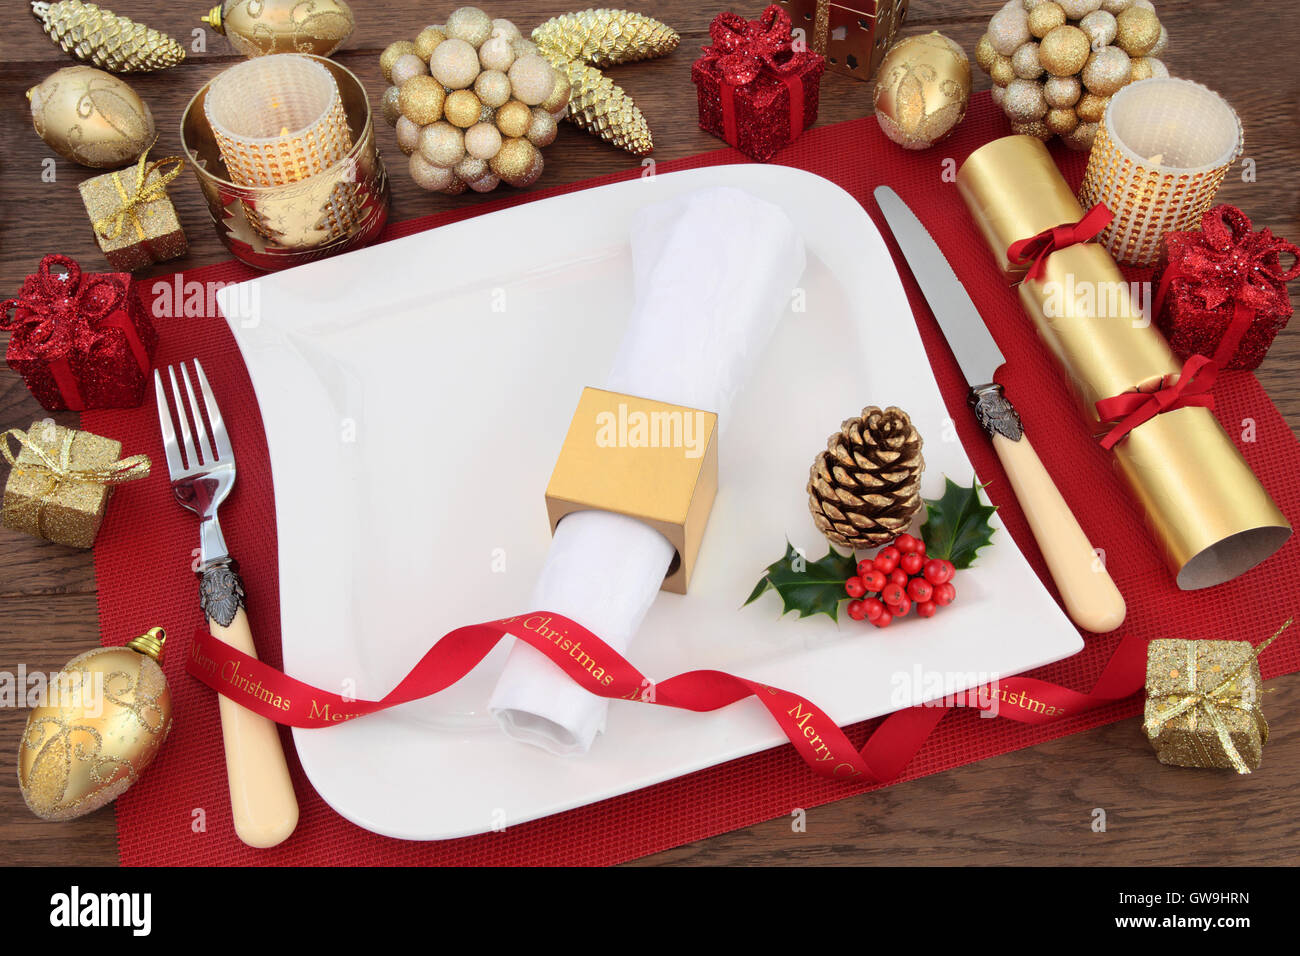 Luxury christmas dinner table setting with white plate, linen serviette, holly, gold bauble decorations, ribbon and cracker. Stock Photo